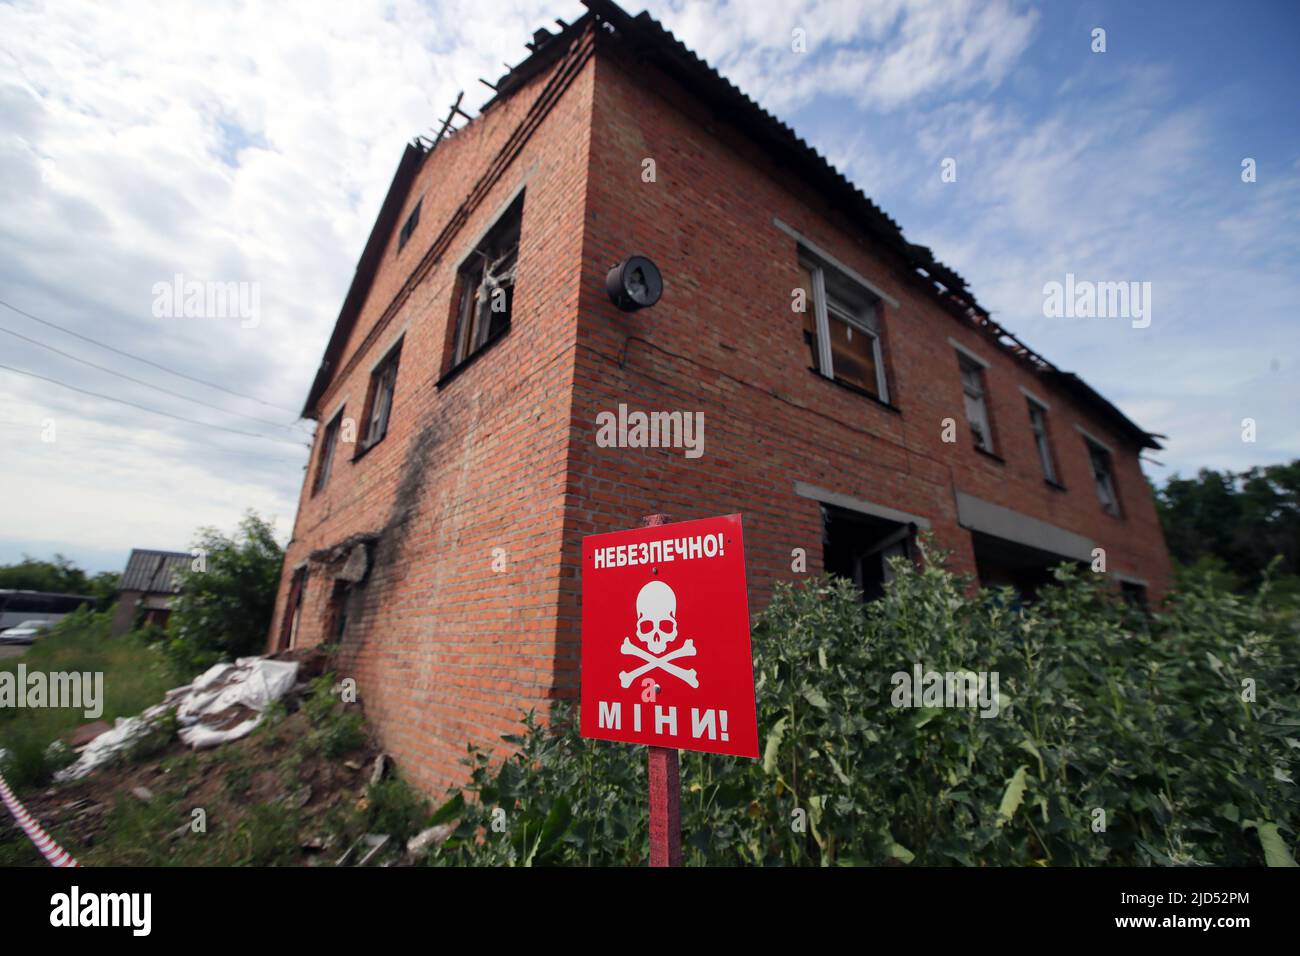 TROSTIANETS, UKRAINE - JUNE 17, 2022 - The 'Danger! Mines!' caution sign is pictured at a brick plant where lots of ammunition and other explosive ite Stock Photo